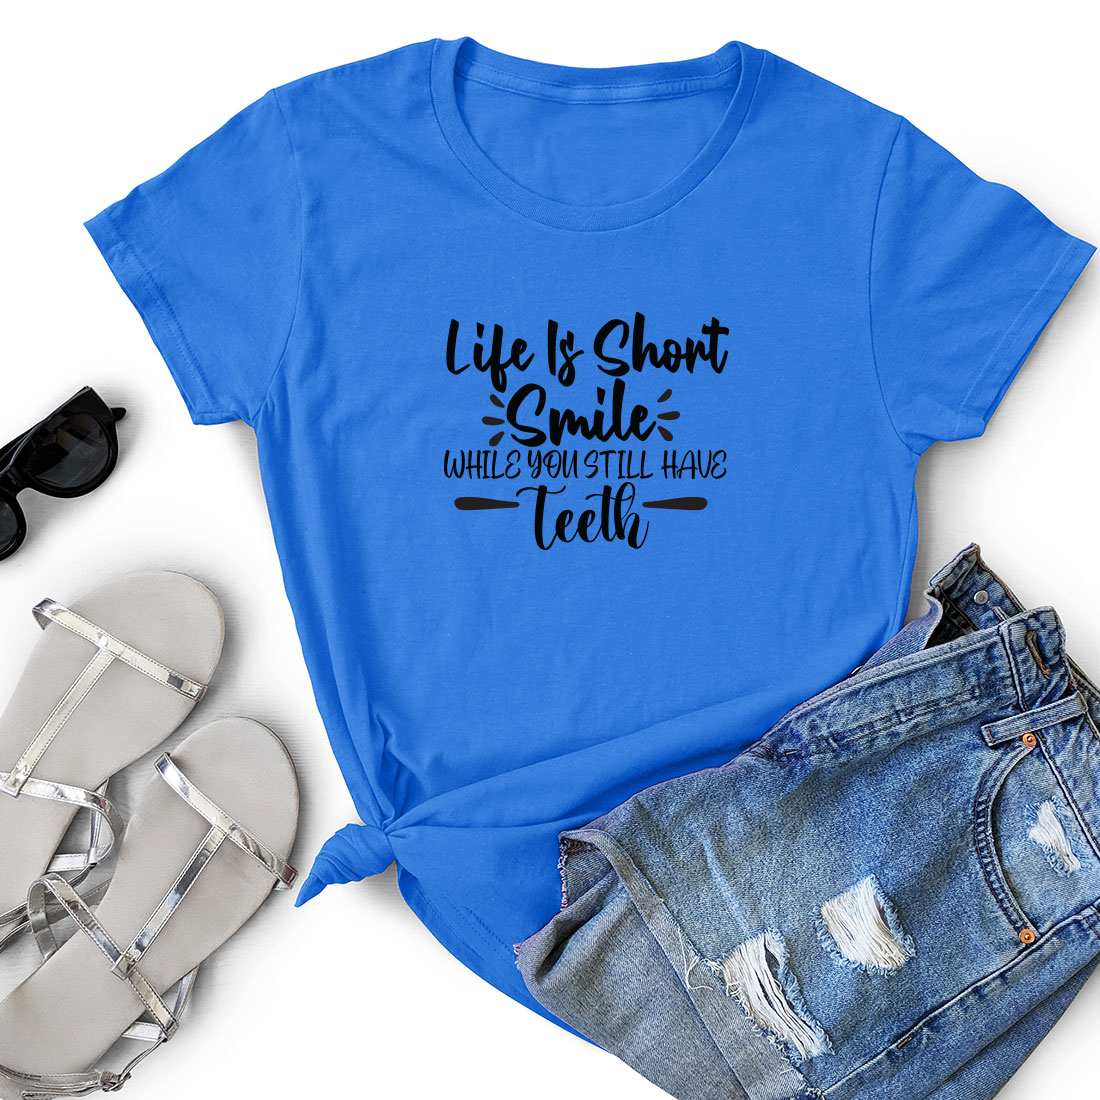 T - shirt that says life is short and smile while someone else has tell.